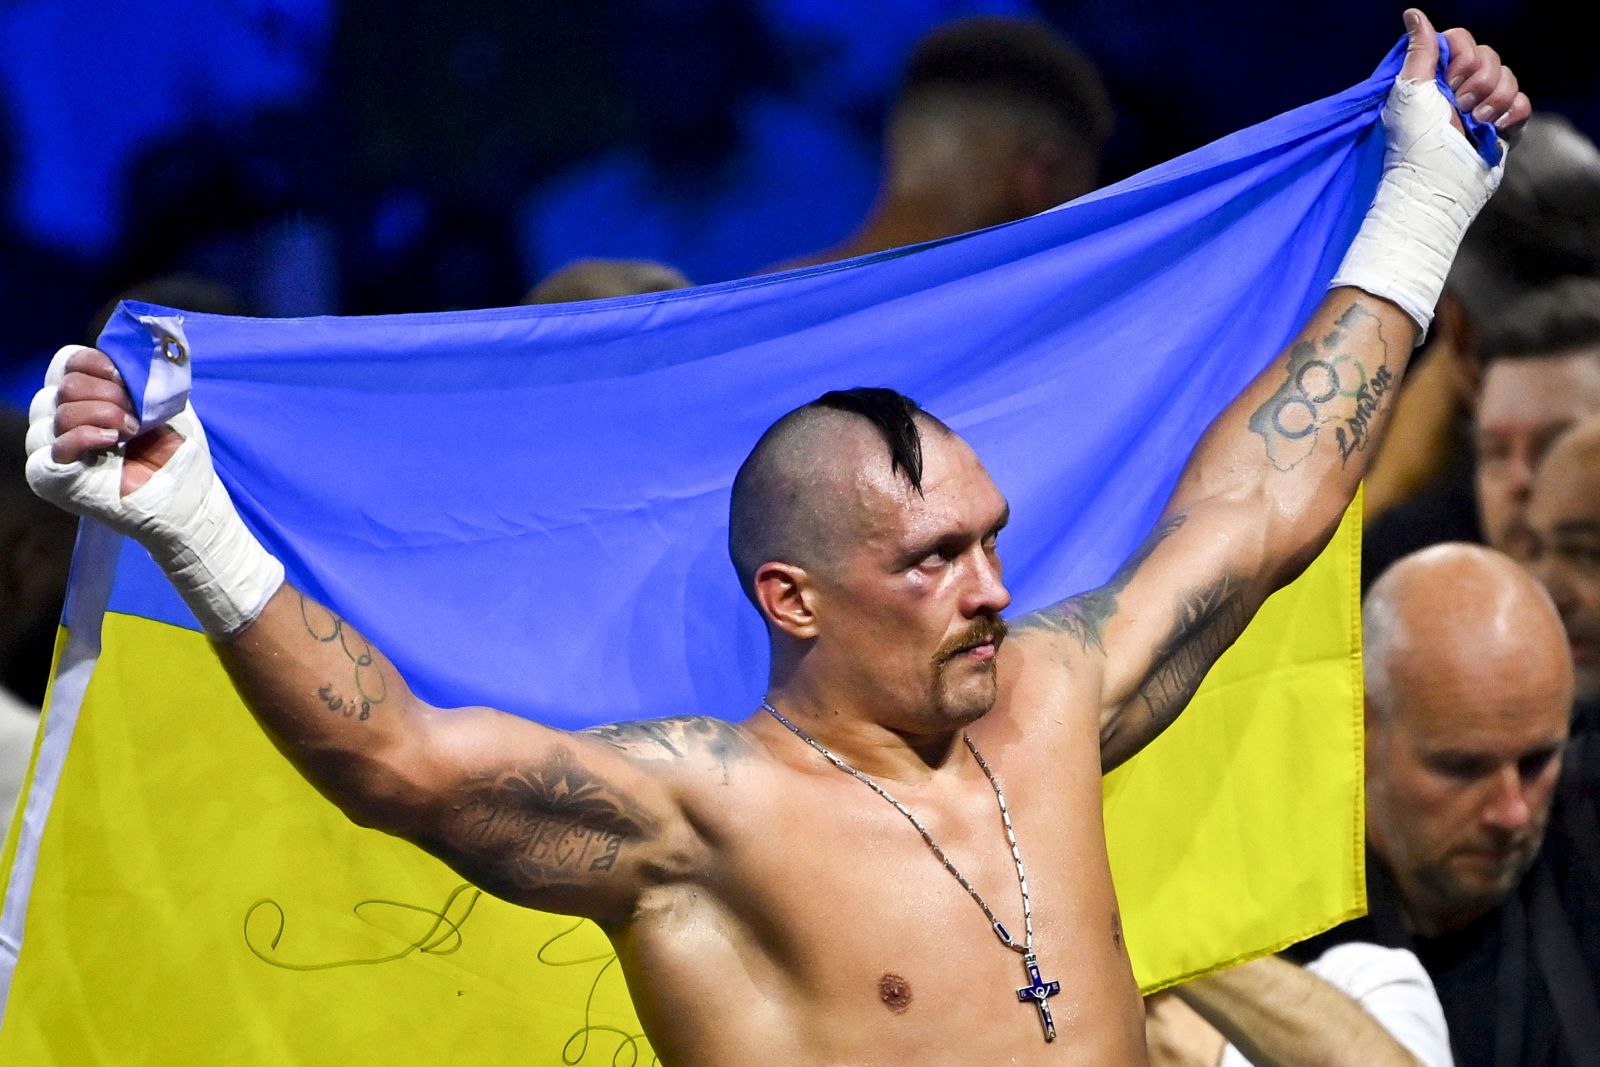 epa10131332 Oleksandr Usyk of Ukraine reacts after defeating Anthony Joshua of Great Britain during the world heavyweight title fight between IBF, WBA and WBO titleholder Oleksandr Usyk and his challenger Anthony Joshua, at the Jeddah Superdome, Saudi Arabia, 21 August 2022. It is the second bout between the two after Usyk beat Joshua in London in September 2021.  EPA/ALI HAMED KHAMAJ